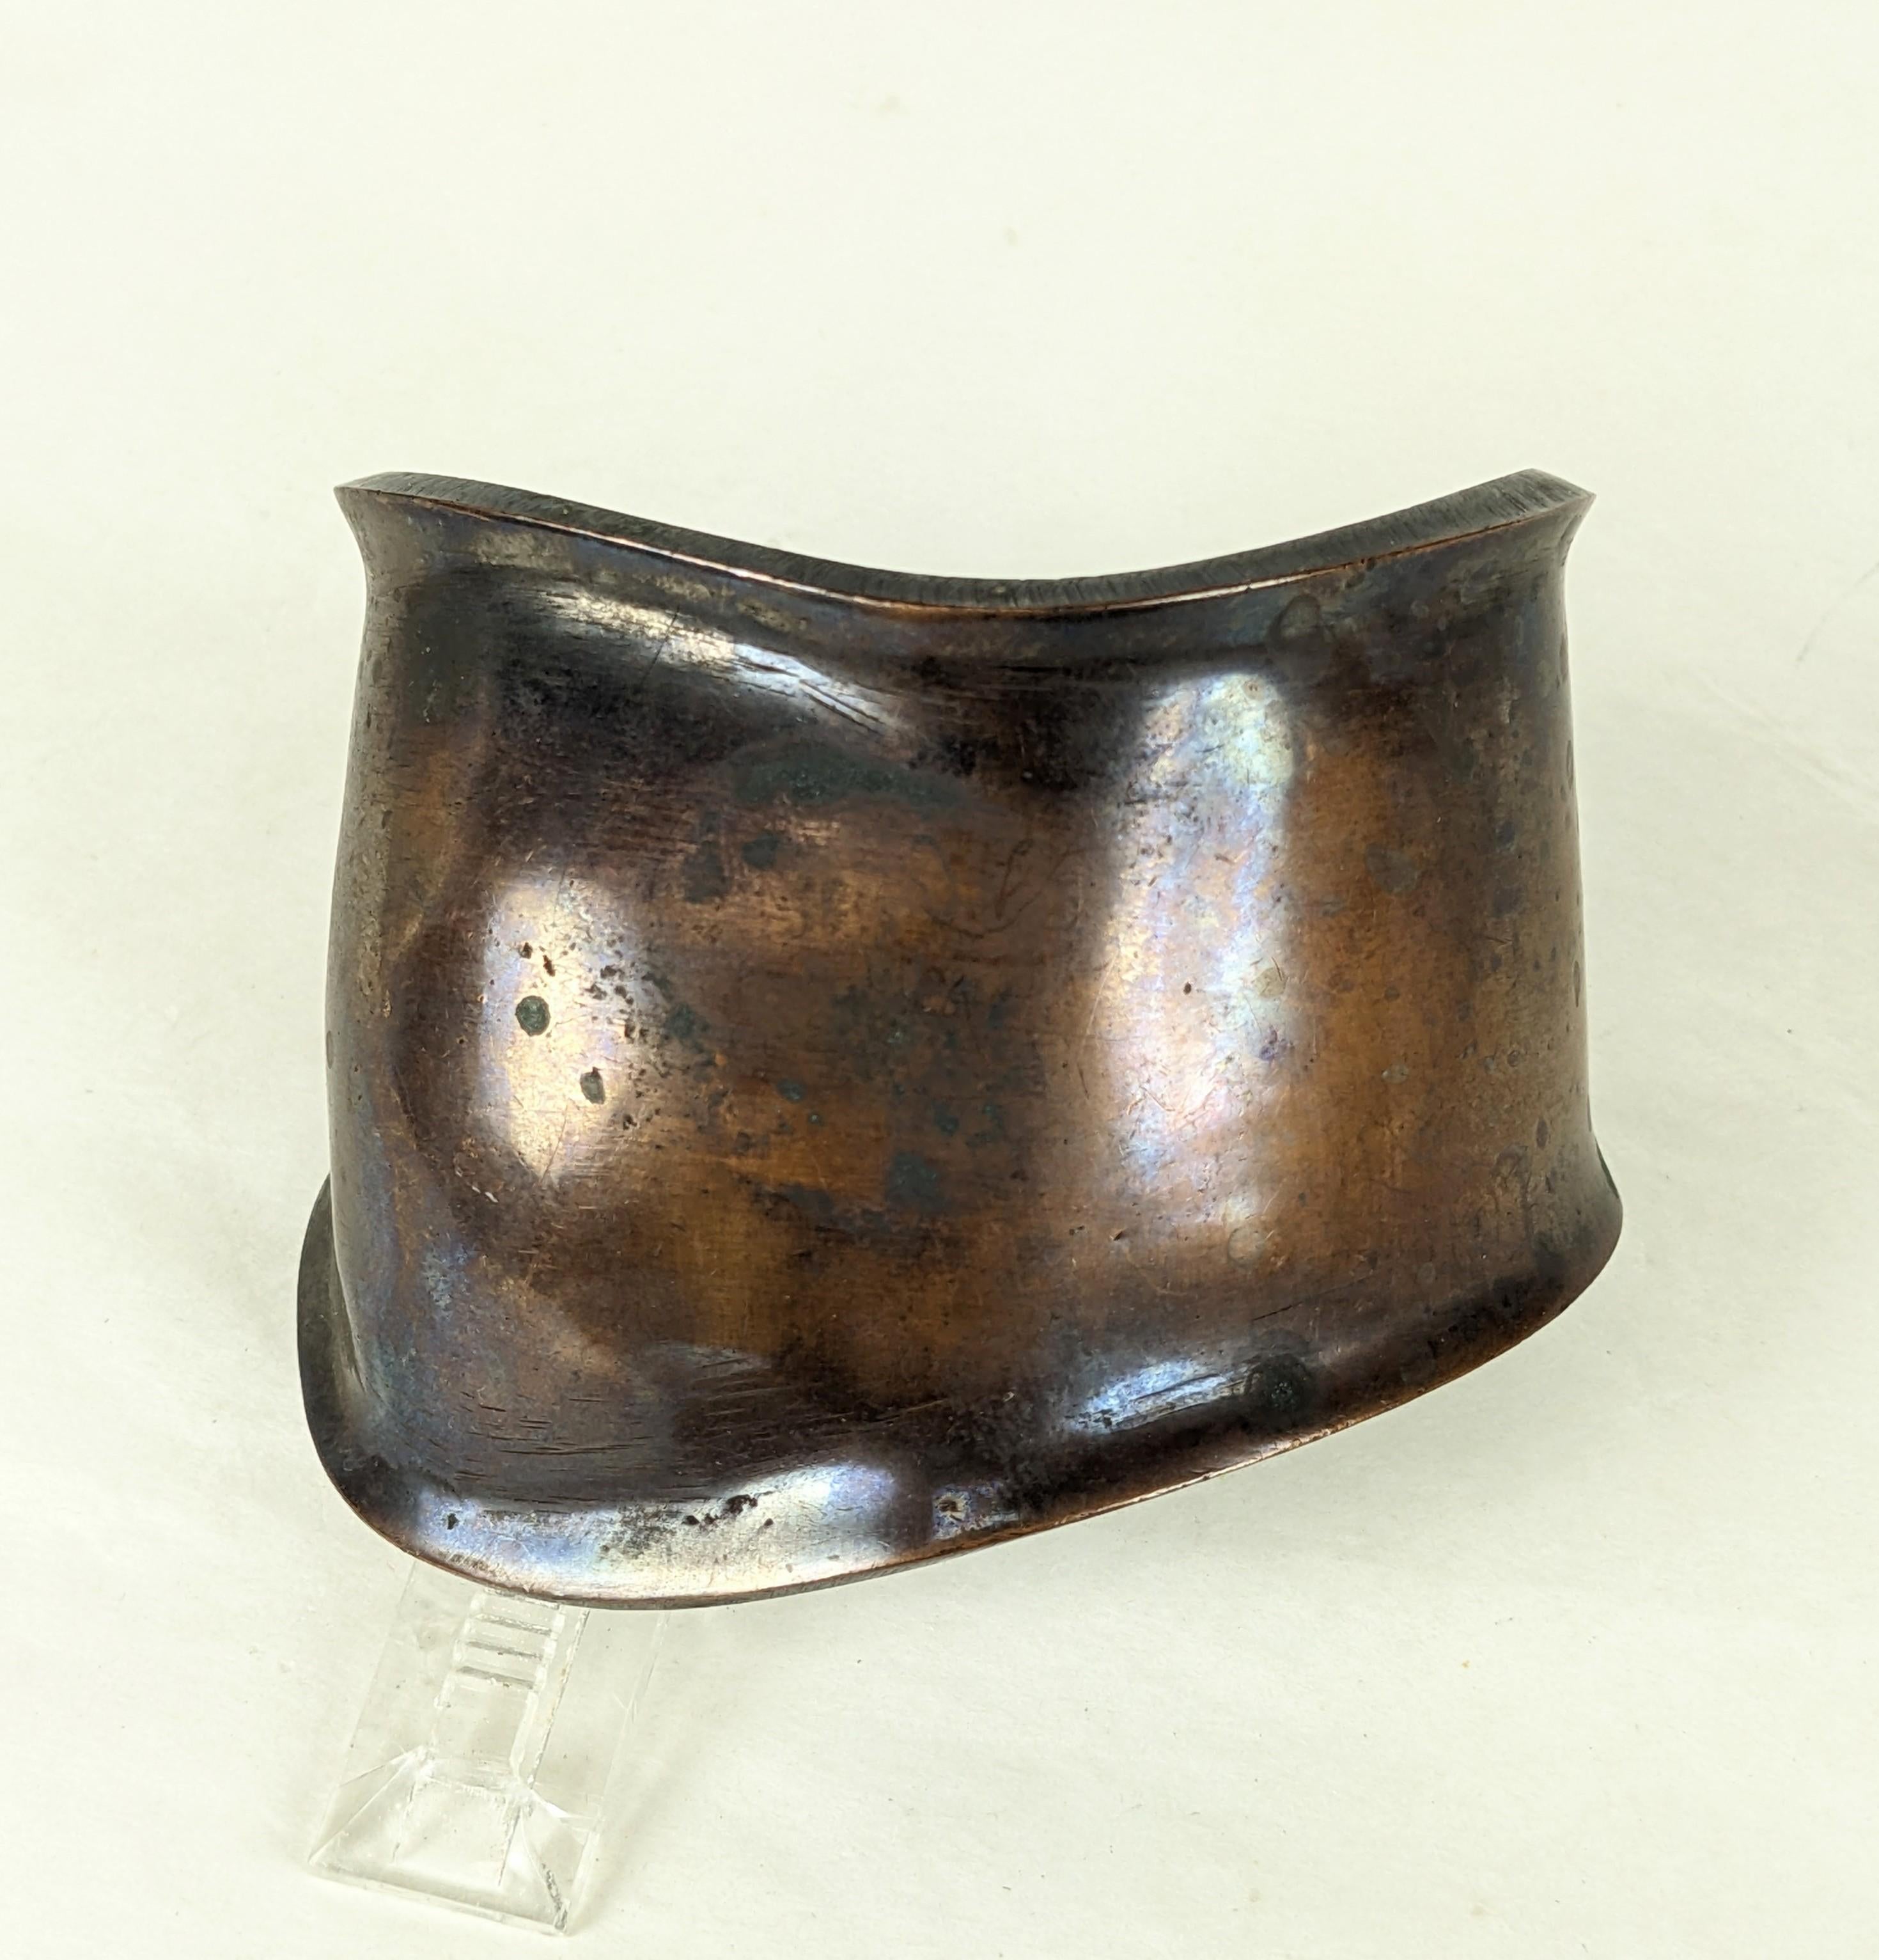 Sculptural Peretti Style Copper Bone Cuff from the 1980's. Heavy Patinaed copper formed in the classic style created by Elsa Peretti. Widest 2.25. Interior measure 6